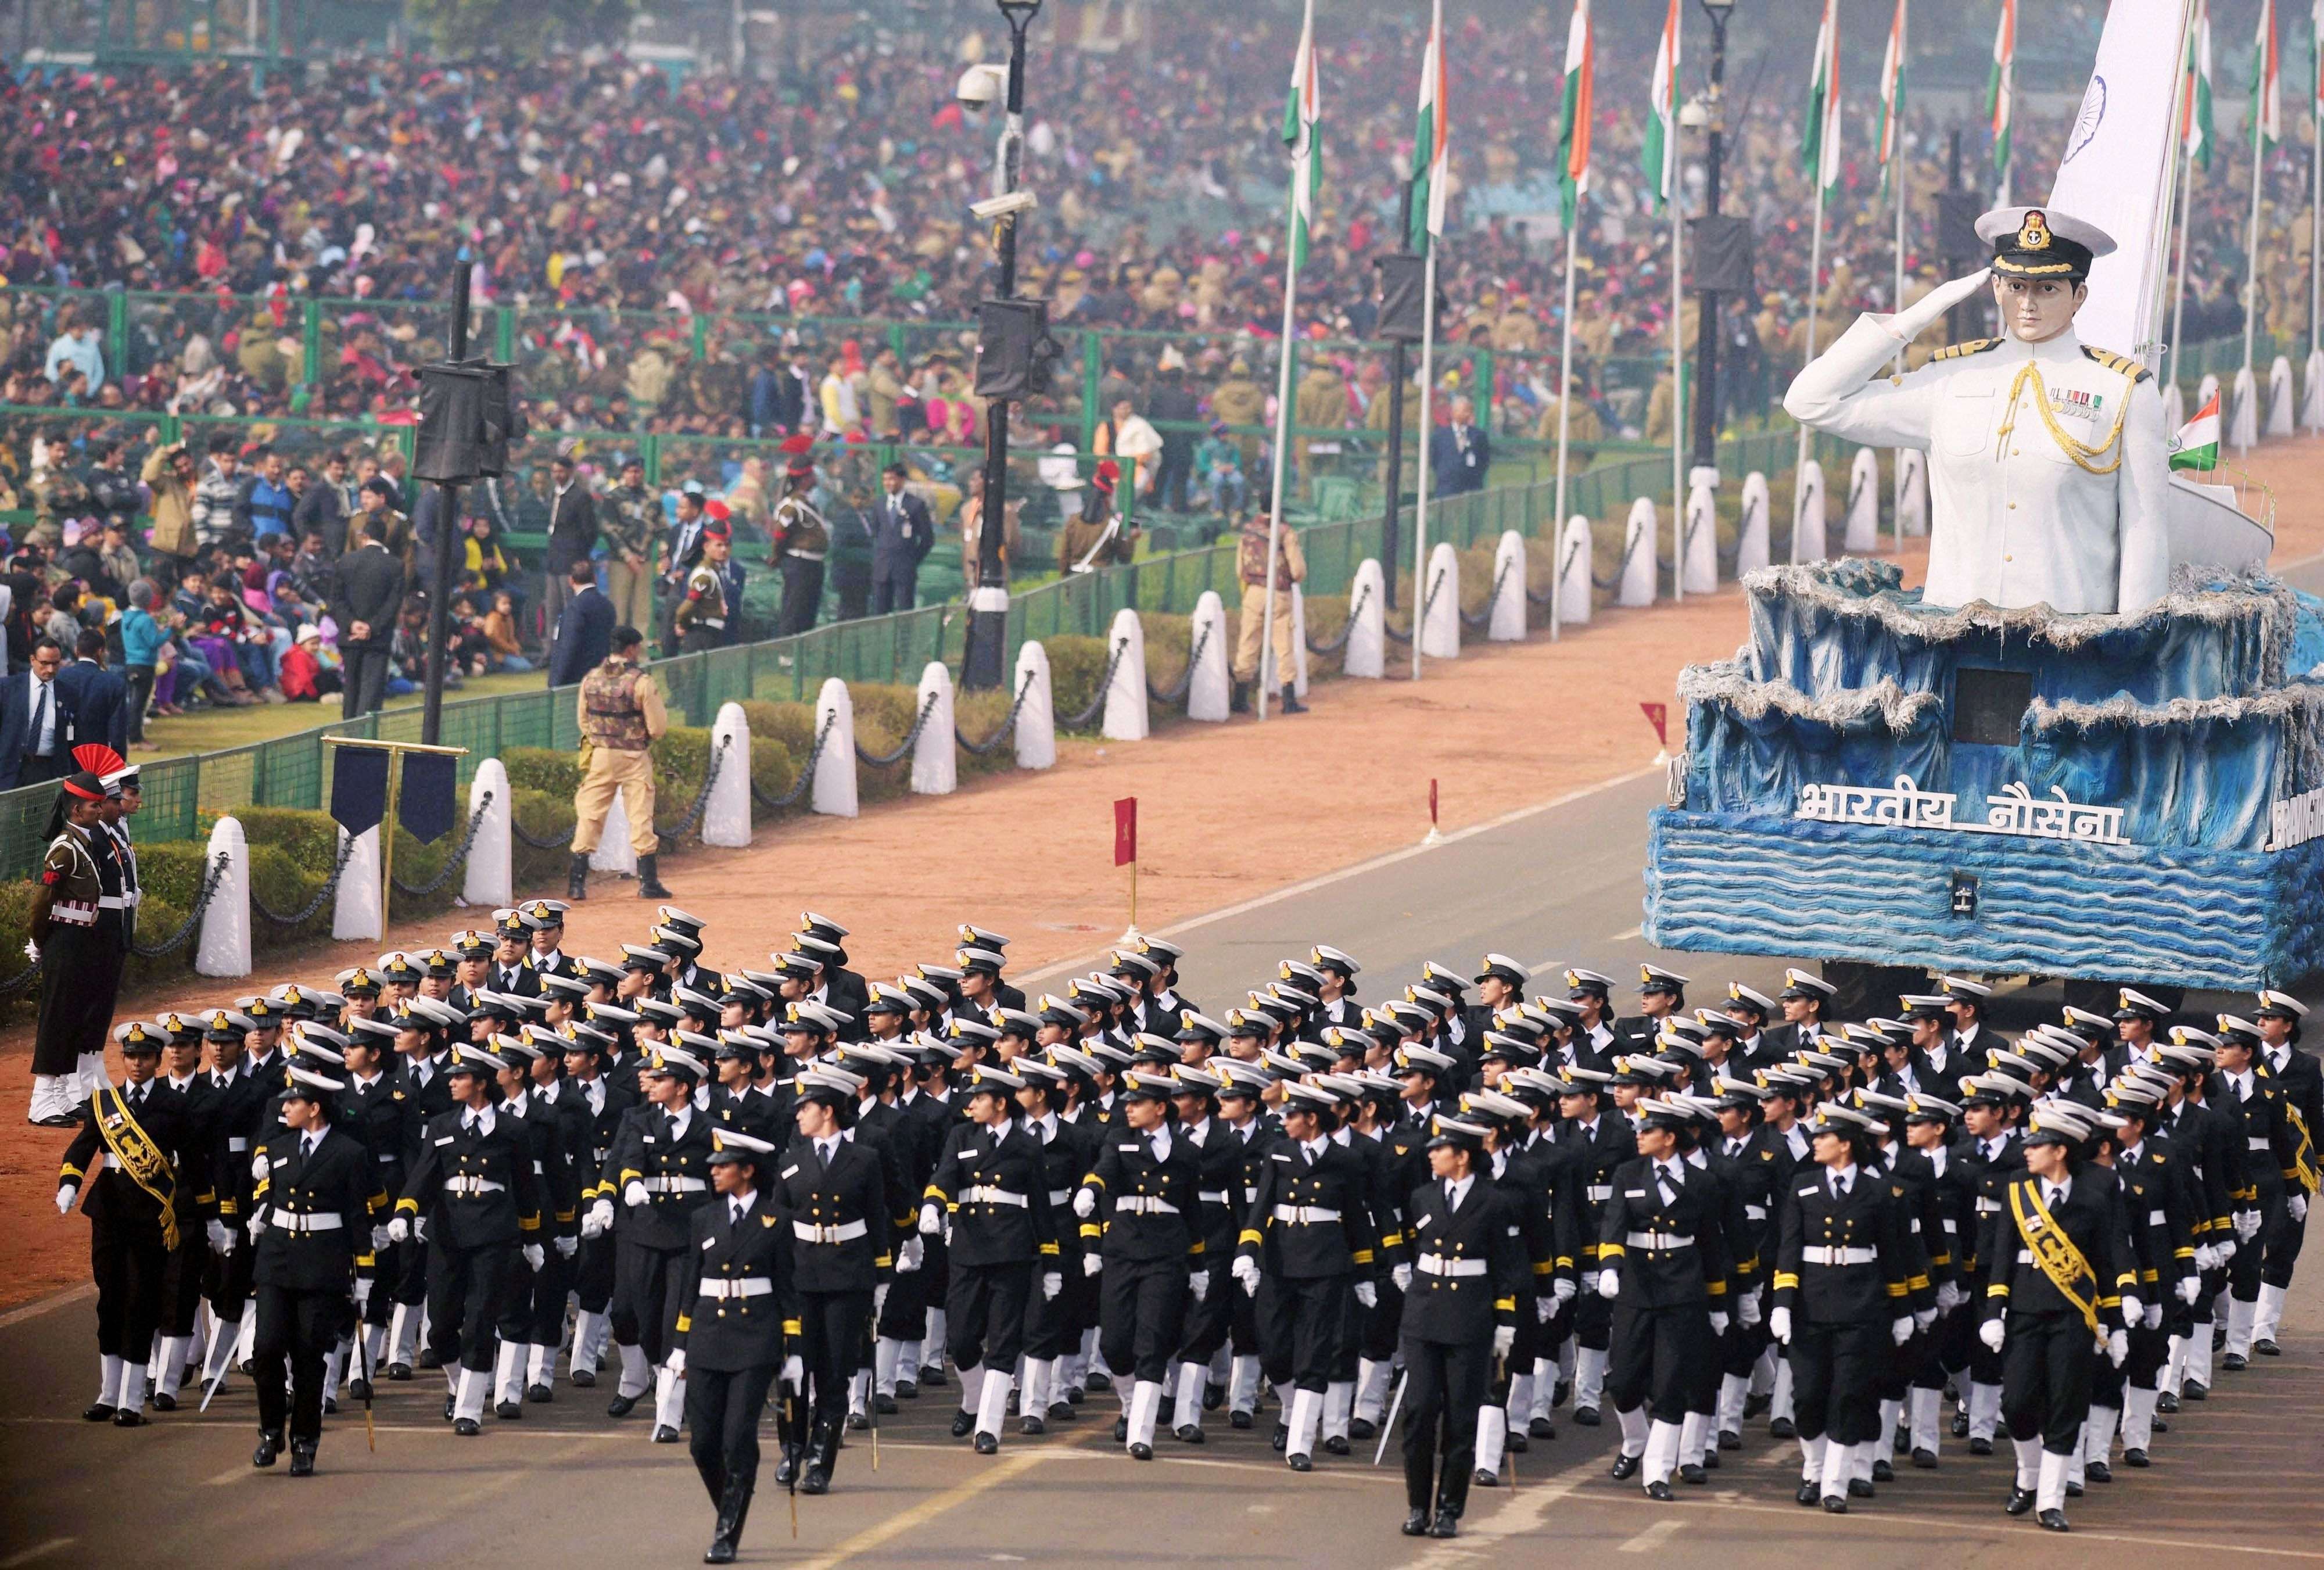 Paramilitary soldiers march during the full dress rehearsal for the Republic Day parade at Rajpath in New Delhi. (PTI photo by Manvender Vashist)